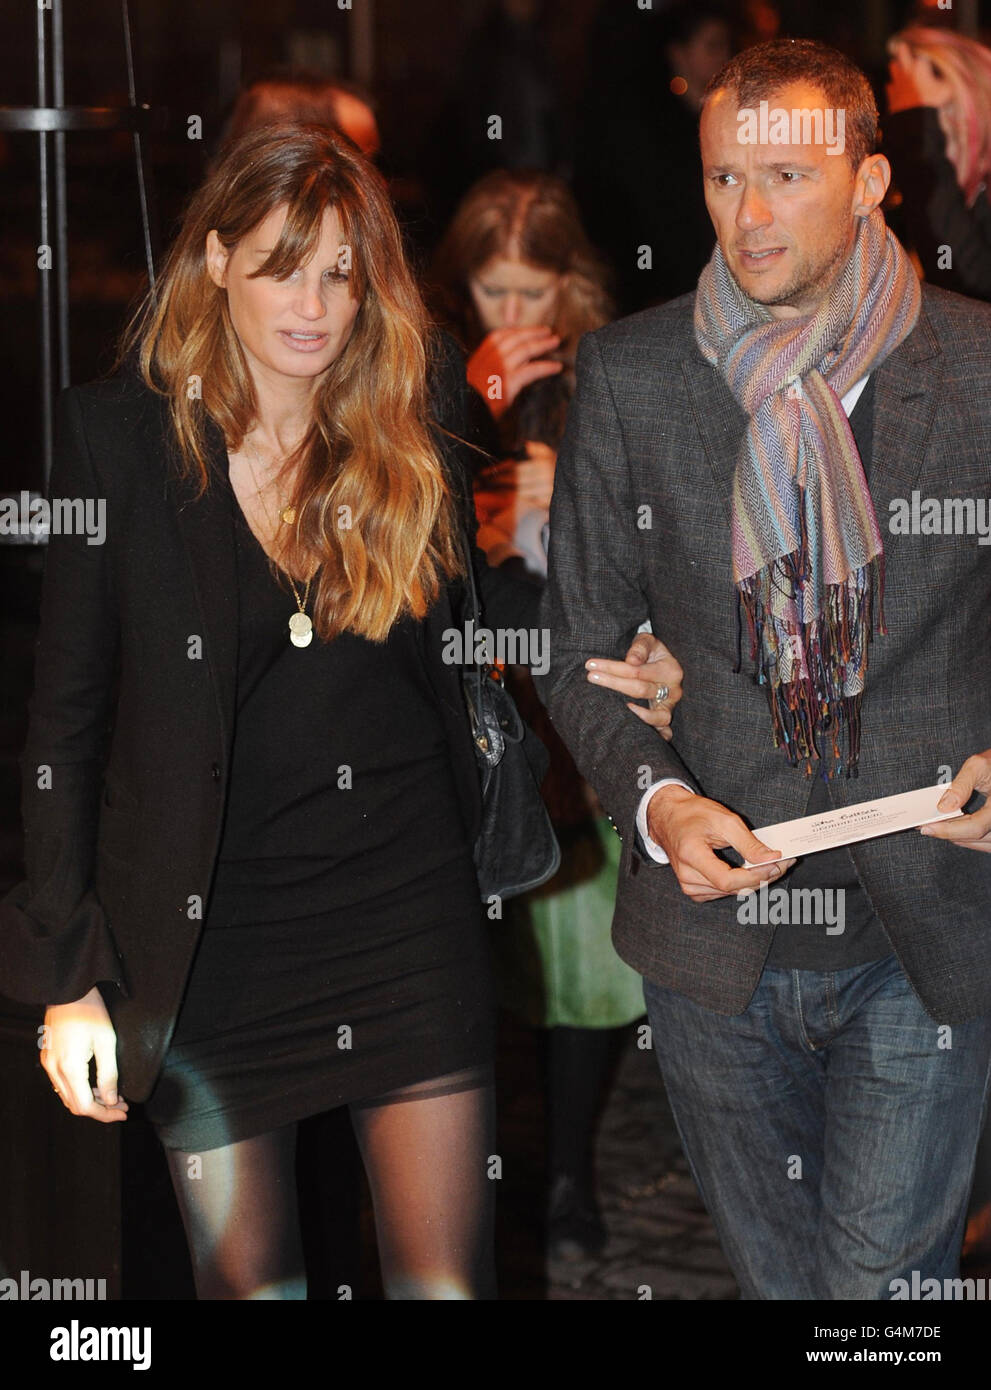 Jemima Khan and John Battsek (right) arriving at The 1000 - London's Most Influential People event held at the London Transport Museum, London. Stock Photo